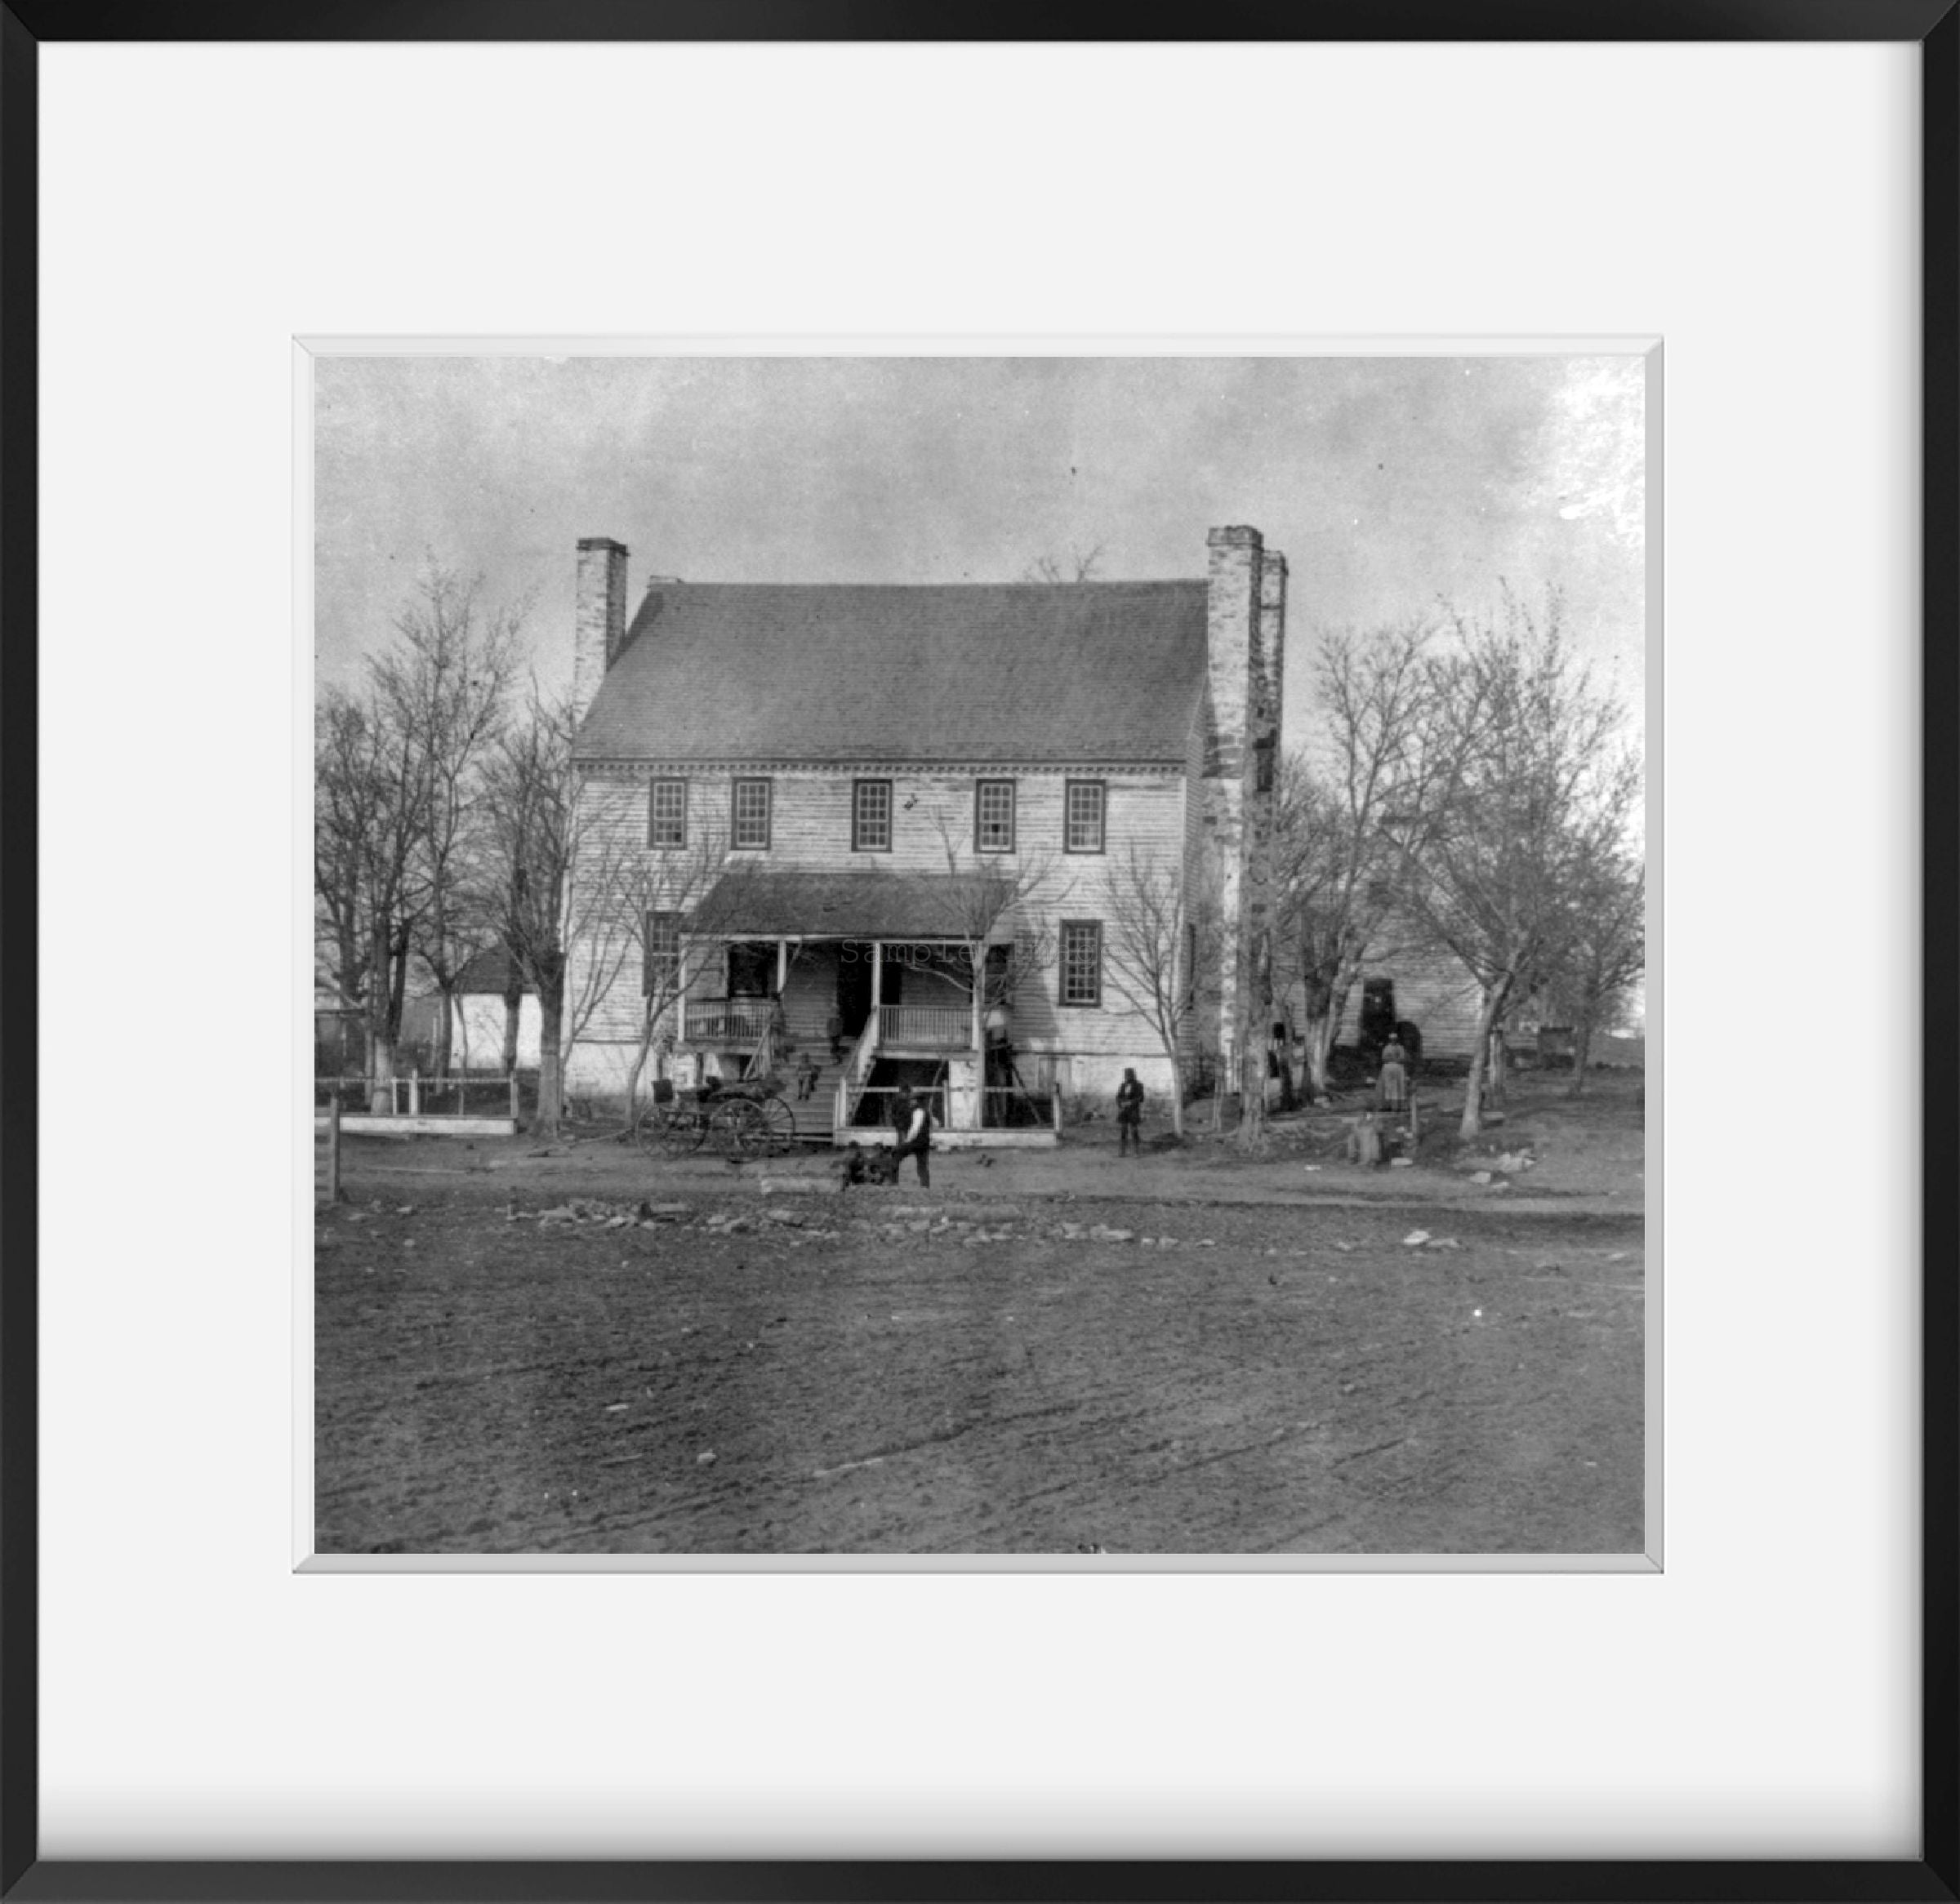 Photo: Grigsby House, Centreville, Va. Headquarters of Gen. Johnston, CSA. March 18